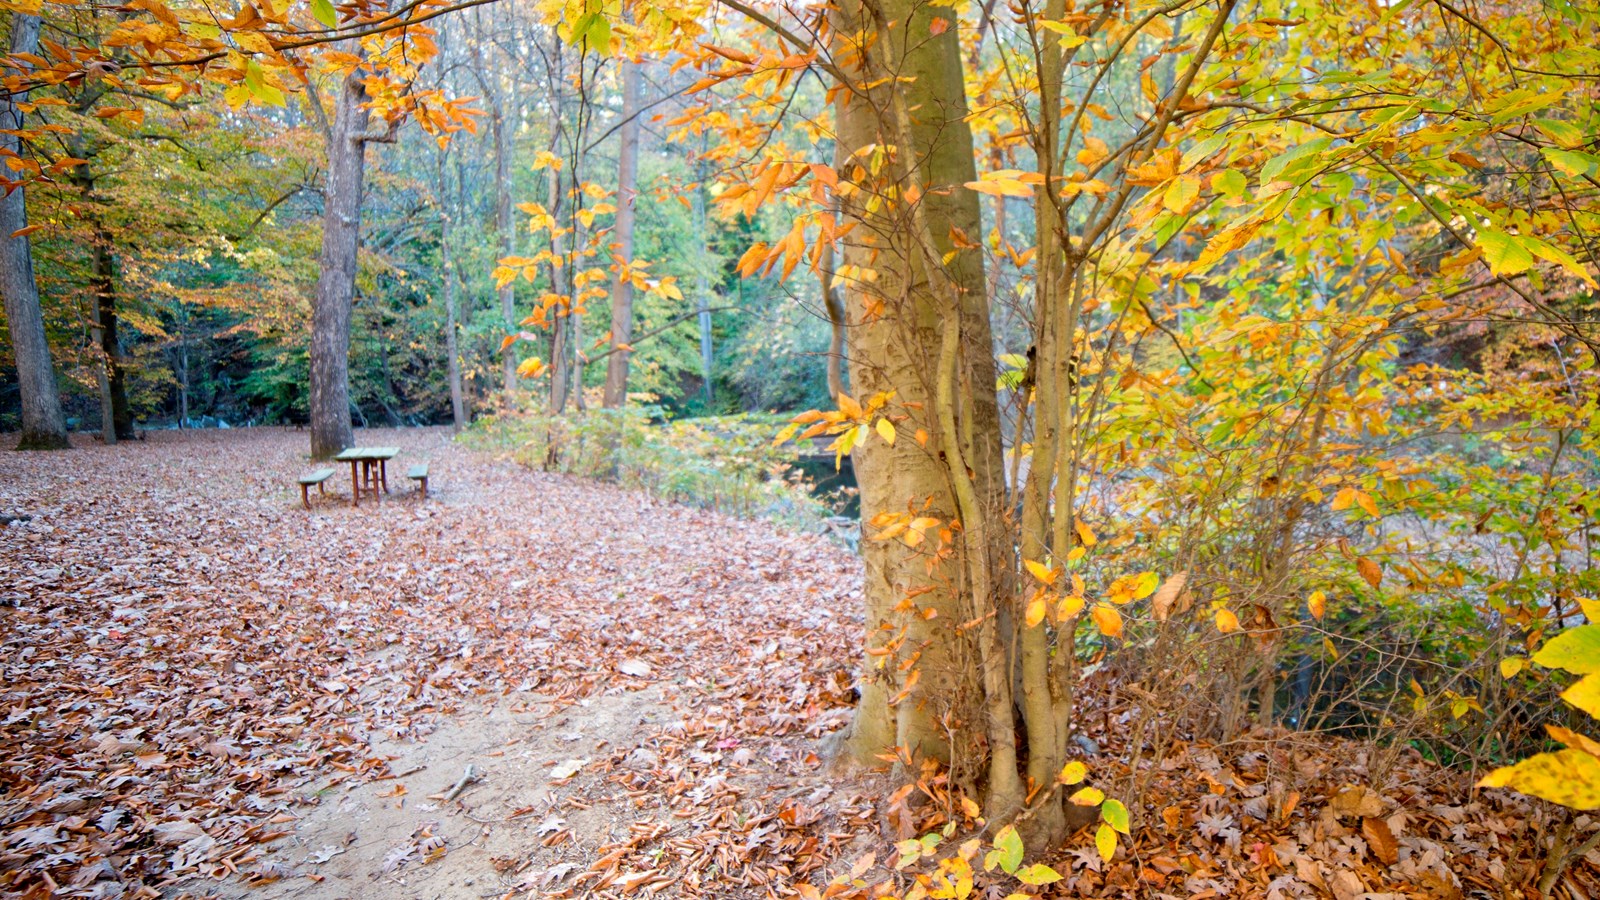 A picnic table next to the creek beneath yellowed fall leaves.